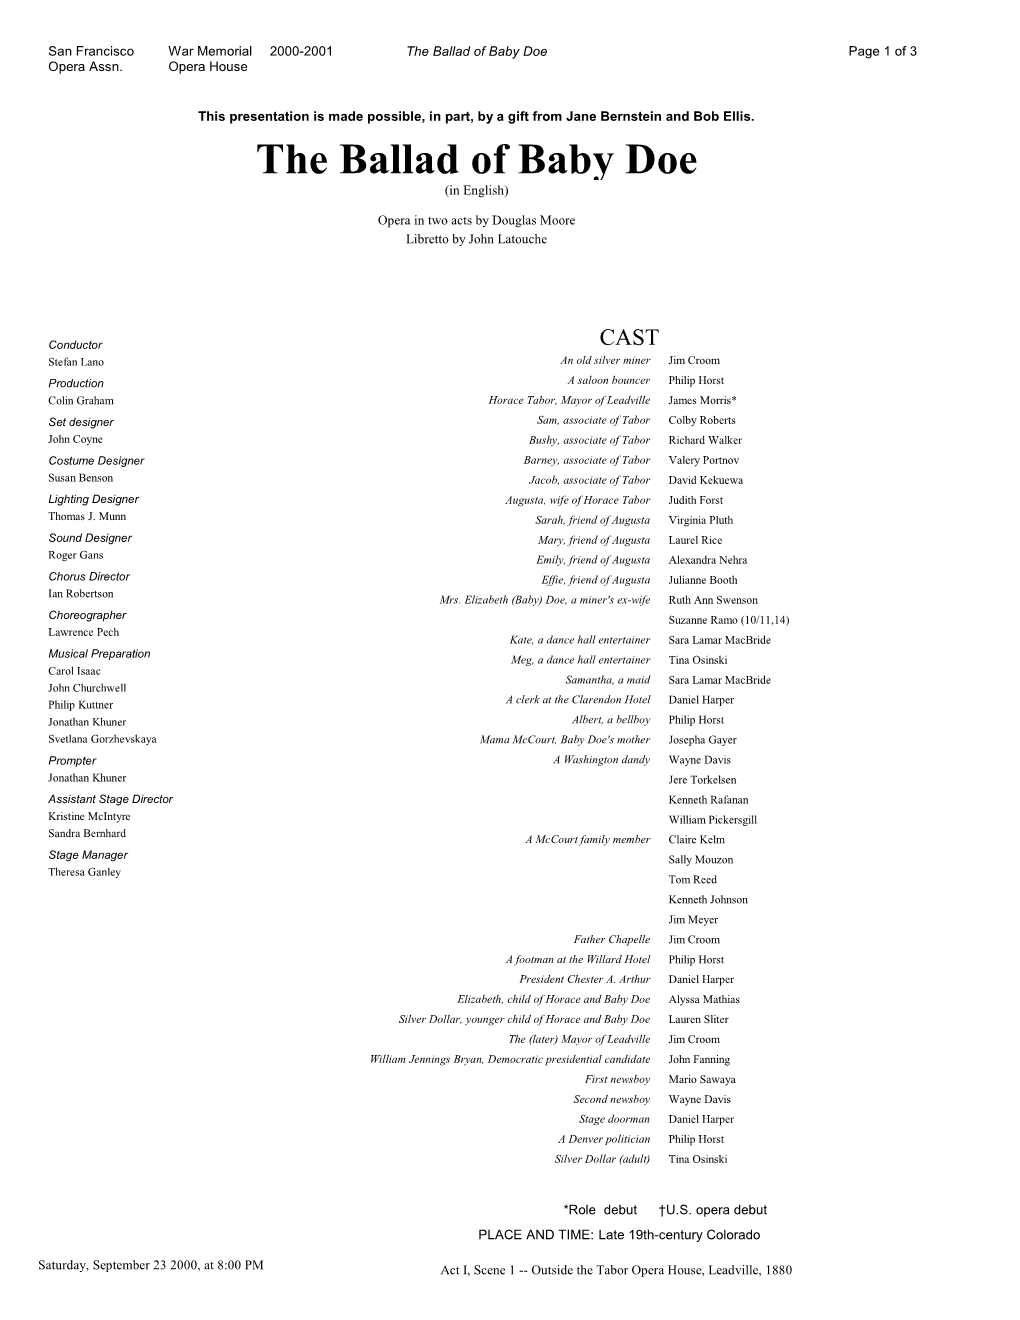 The Ballad of Baby Doe Page 1 of 3 Opera Assn